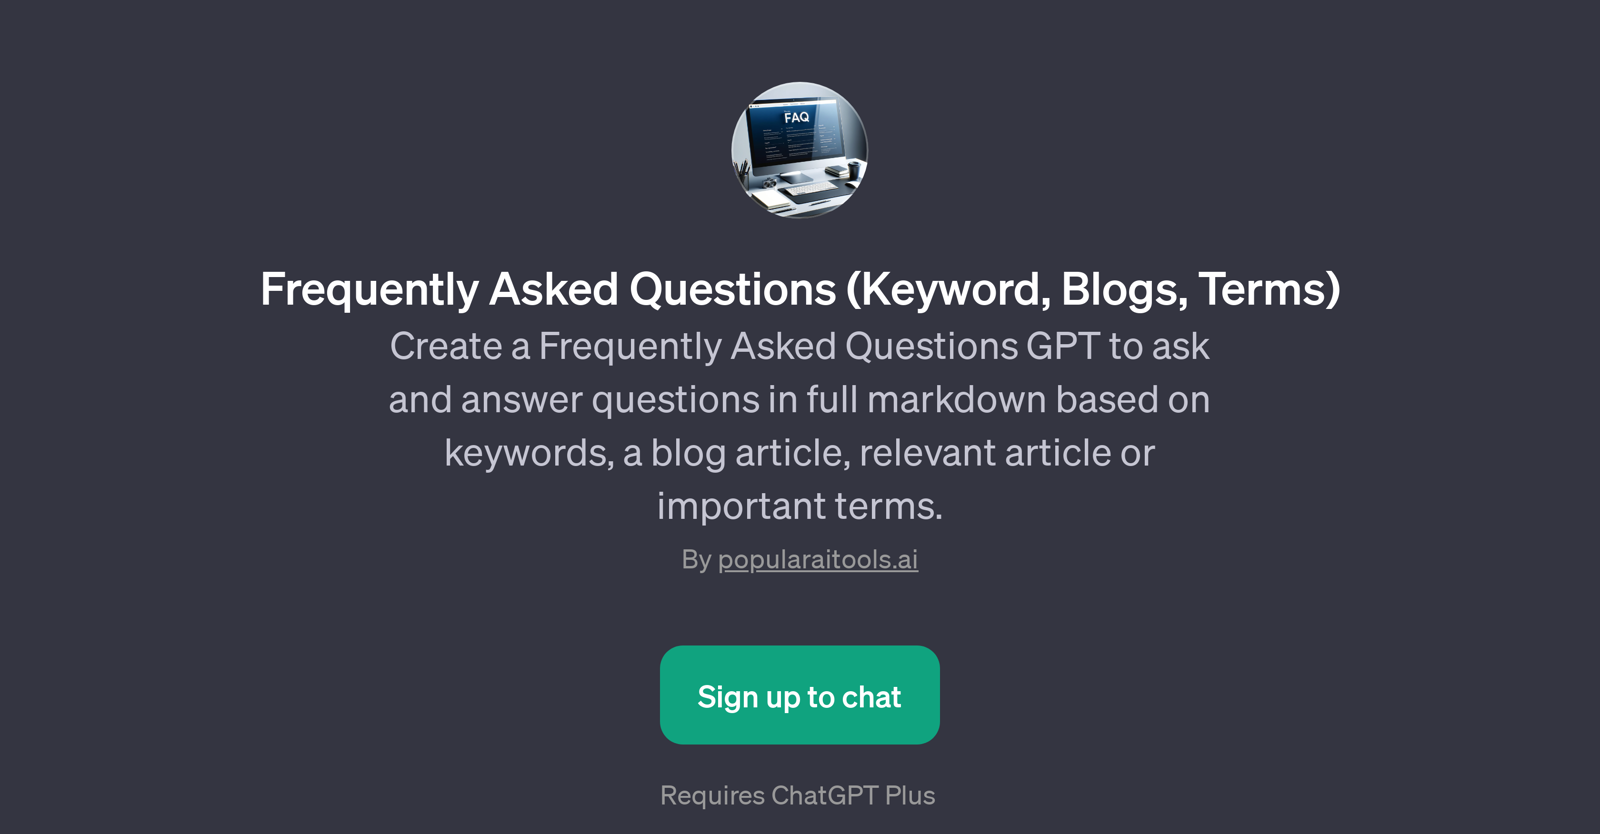 Frequently Asked Questions (Keyword, Blogs, Terms) GPT website